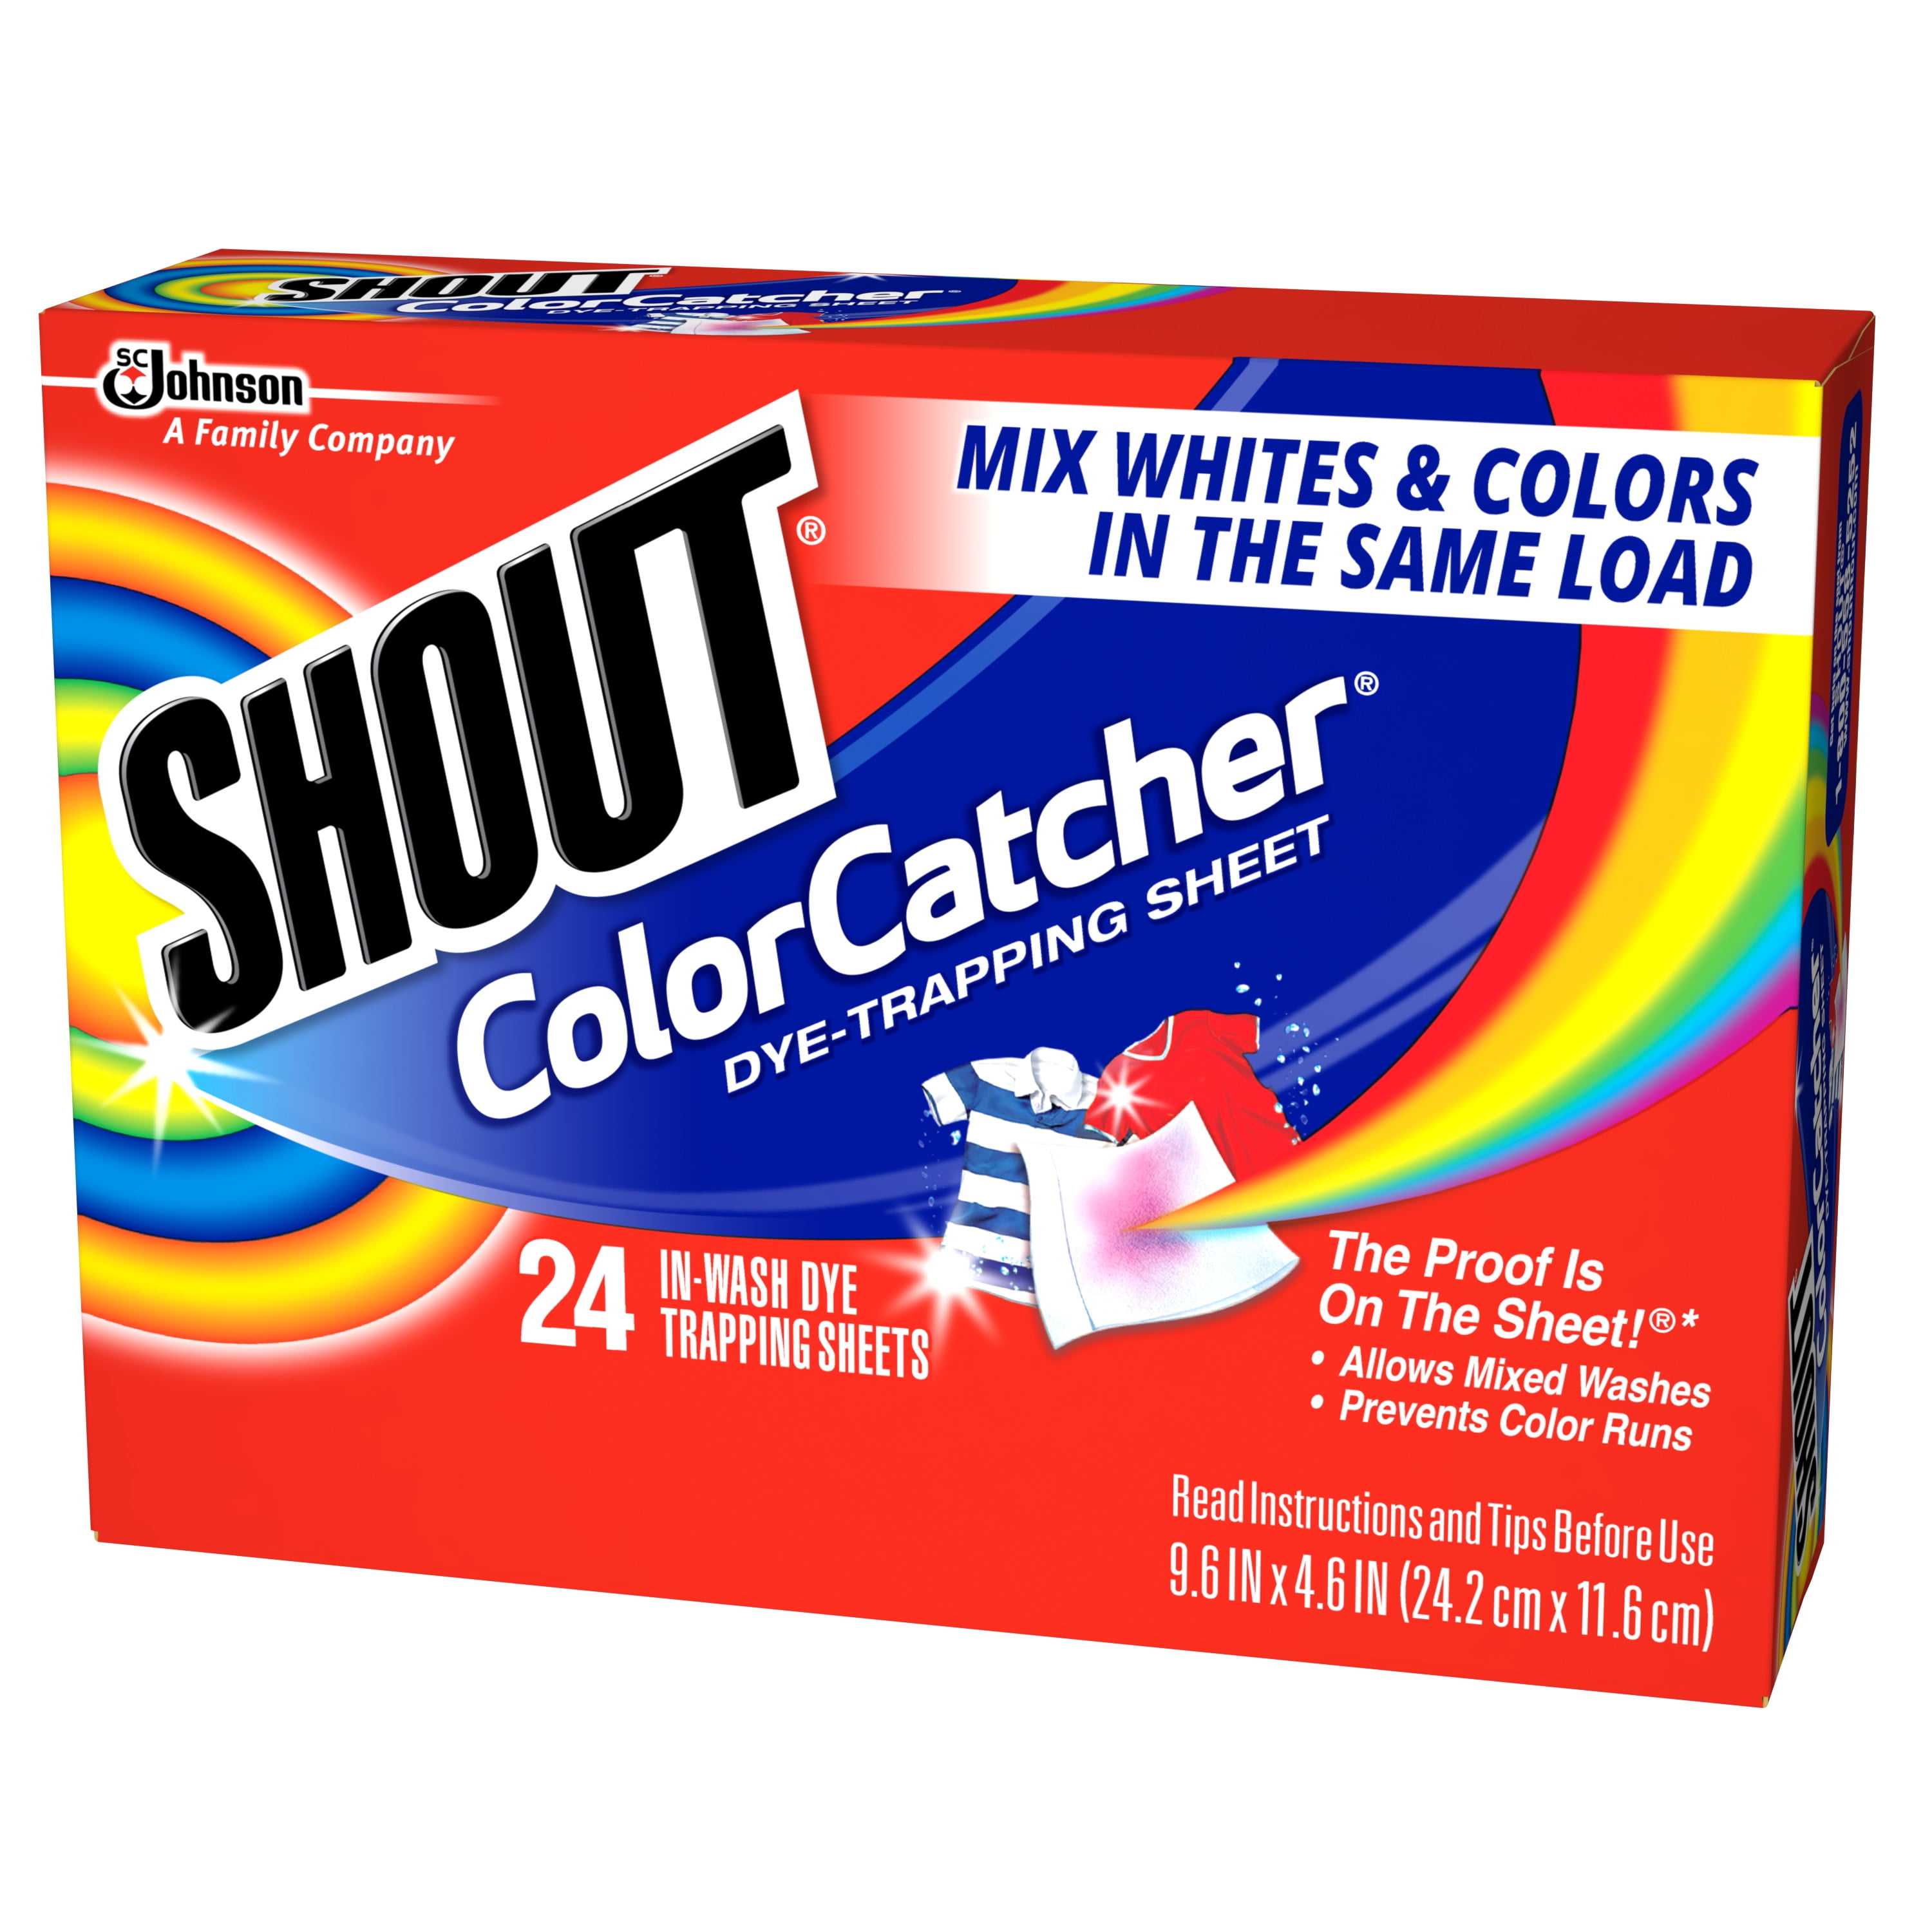  Shout Color Catcher Sheets For Laundry, Allow Mixed Washes,  Prevent Color Runs, And Maintain Original Color Of Clothing, 72 Count -  Pack Of 4